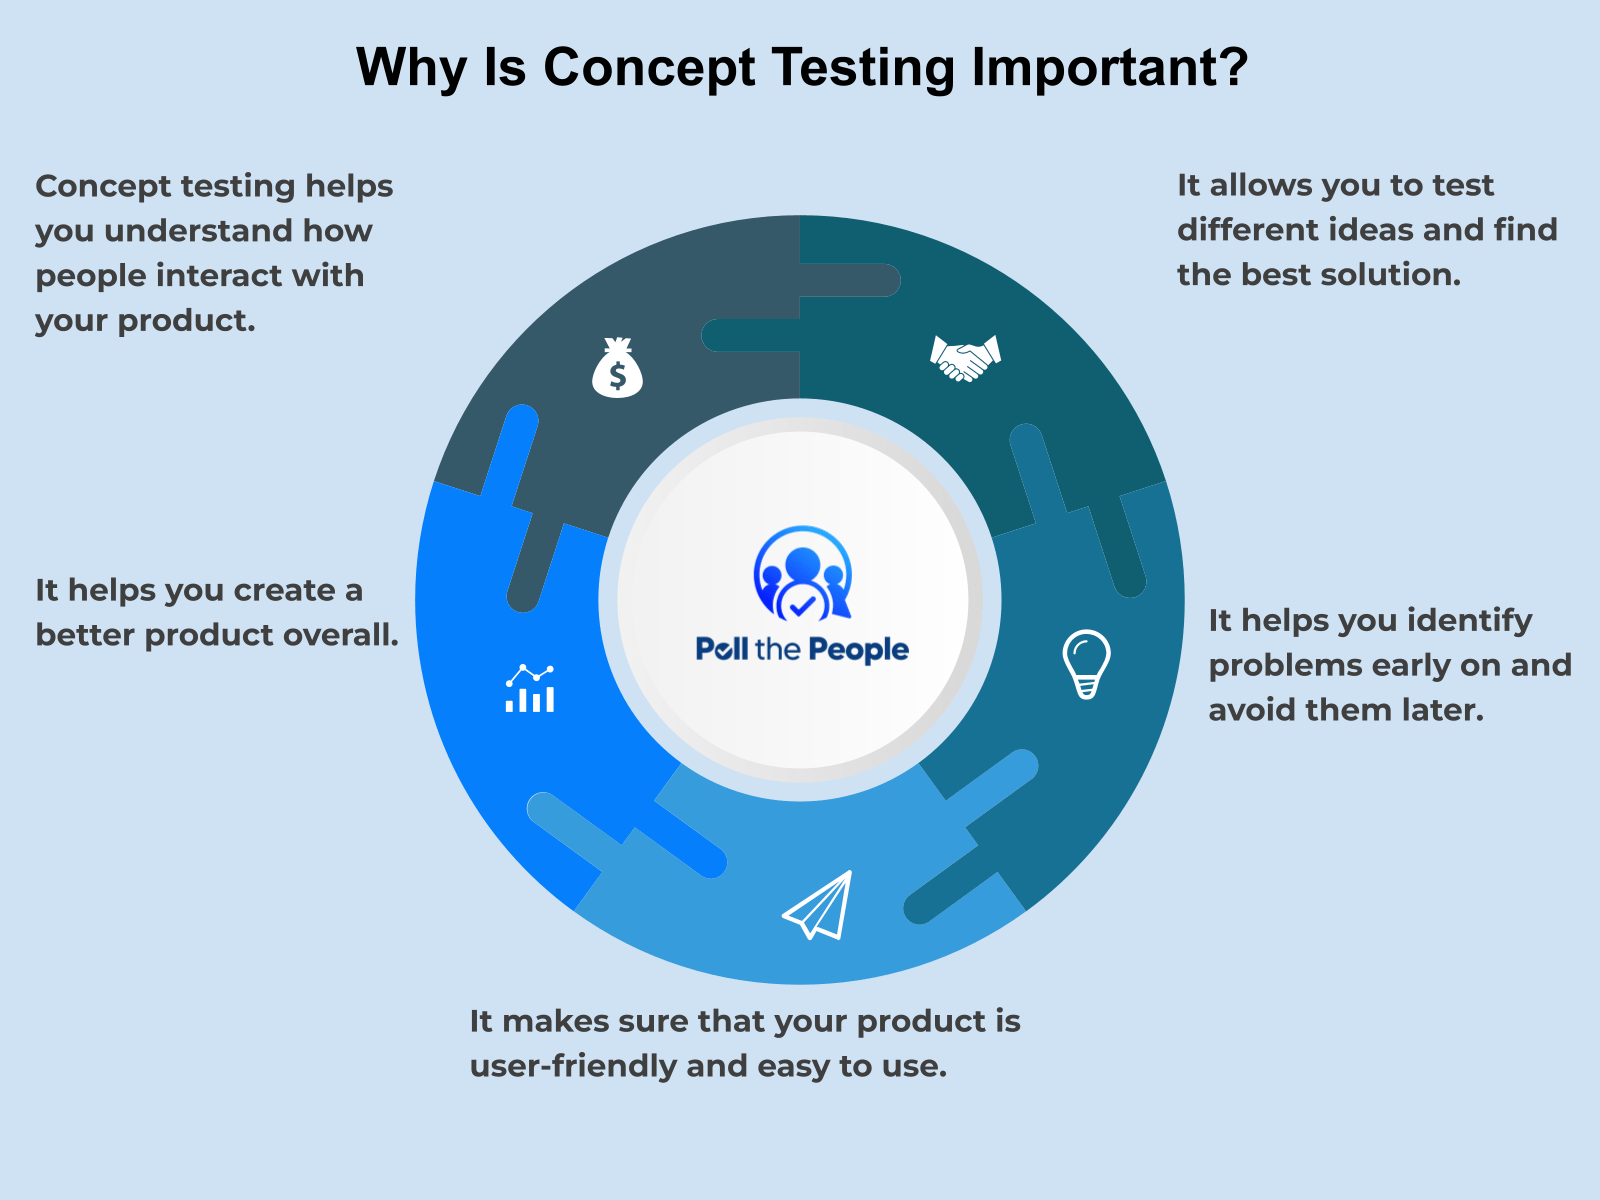 Why is concept testing important